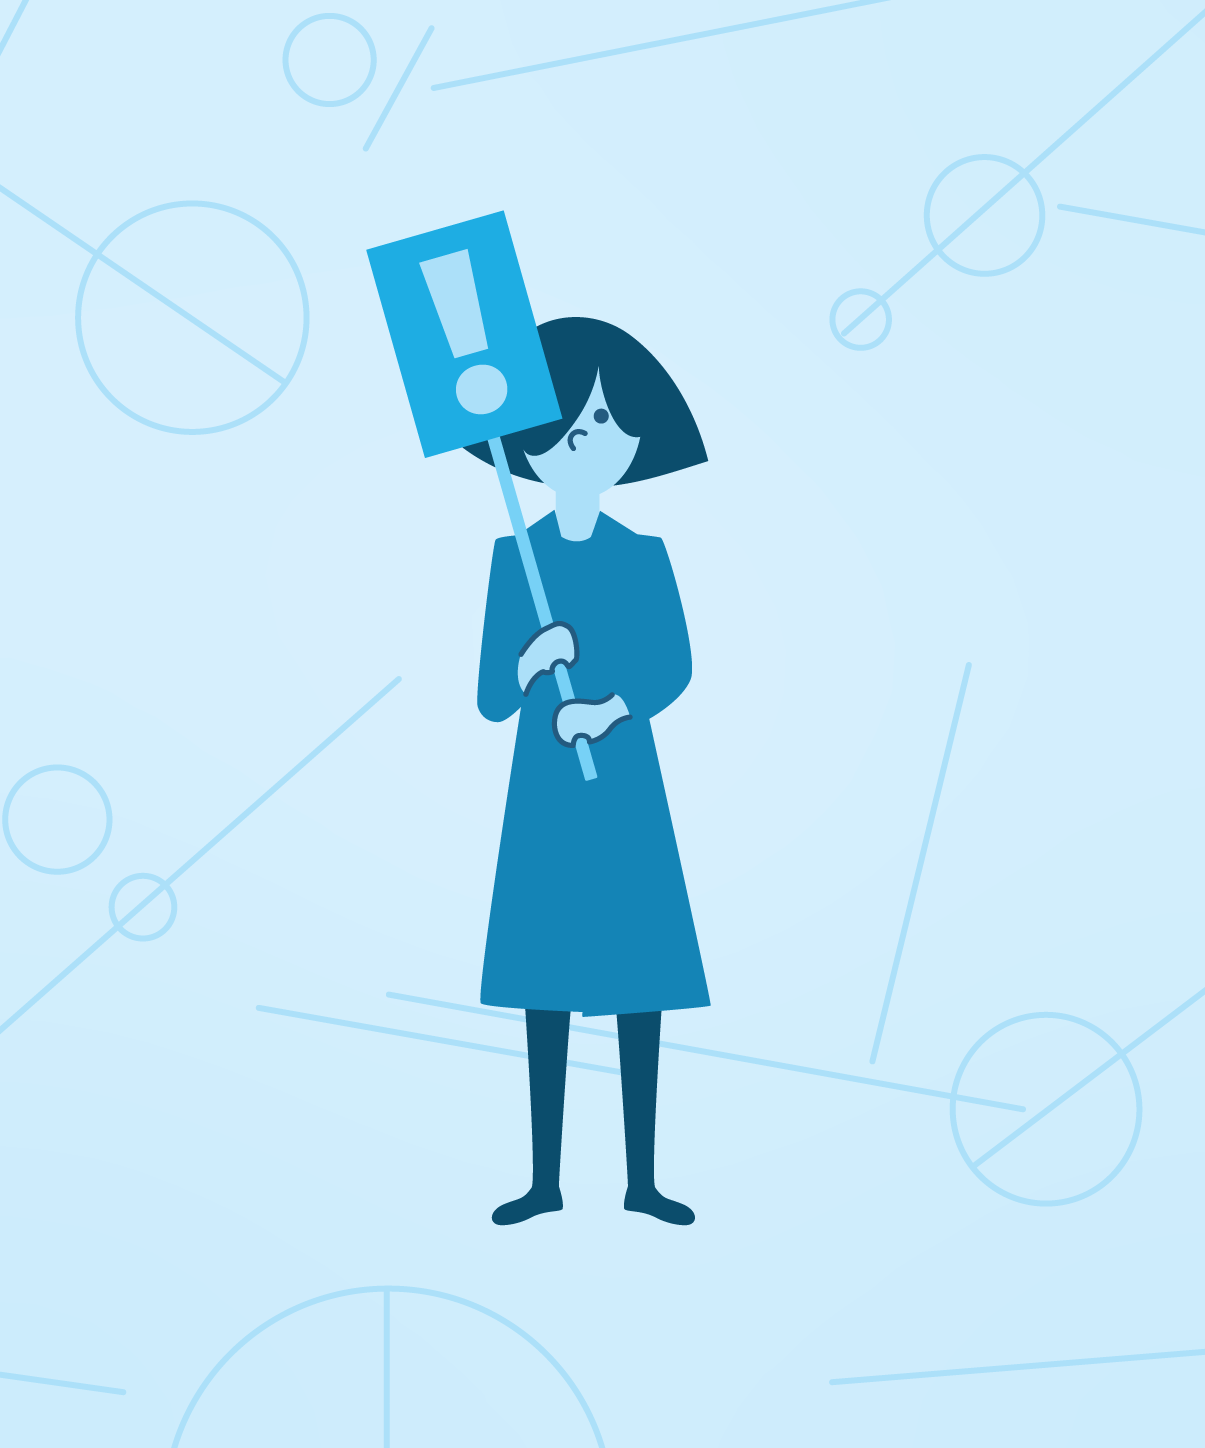 Illustration of a woman in a blue dress holding a sign with an exclamation point on it.